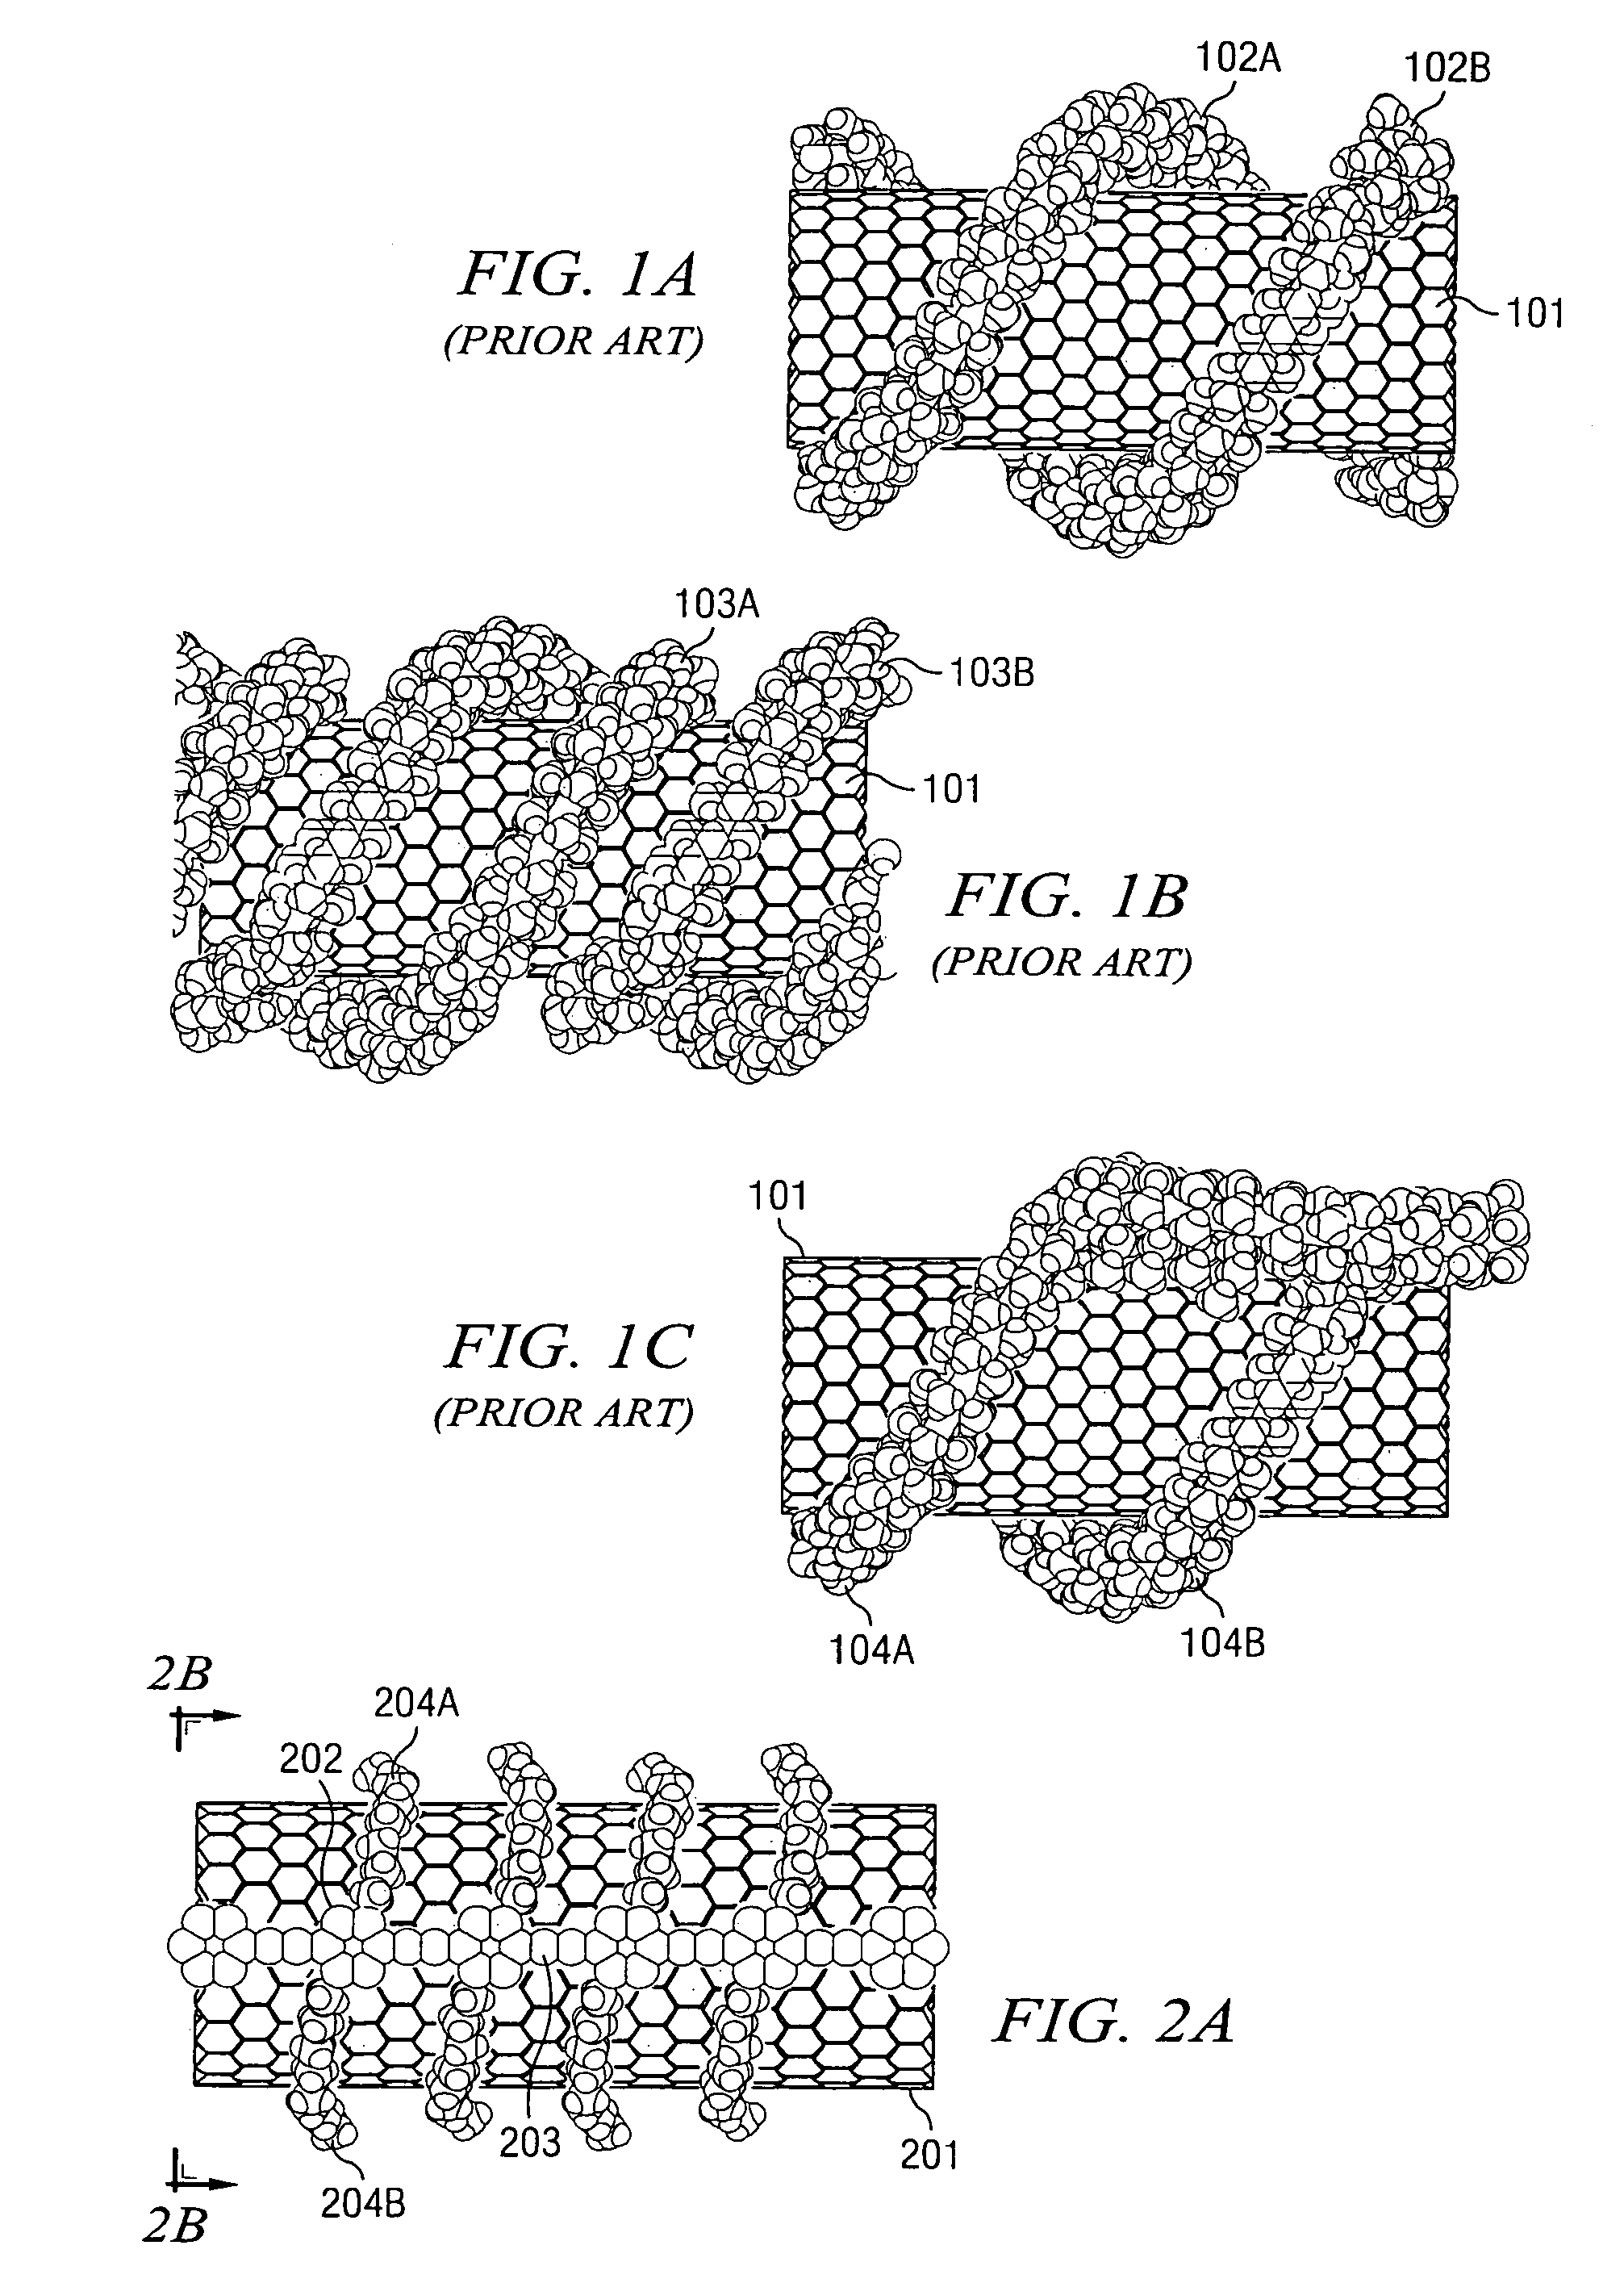 Polymer and method for using the polymer for solubilizing nanotubes